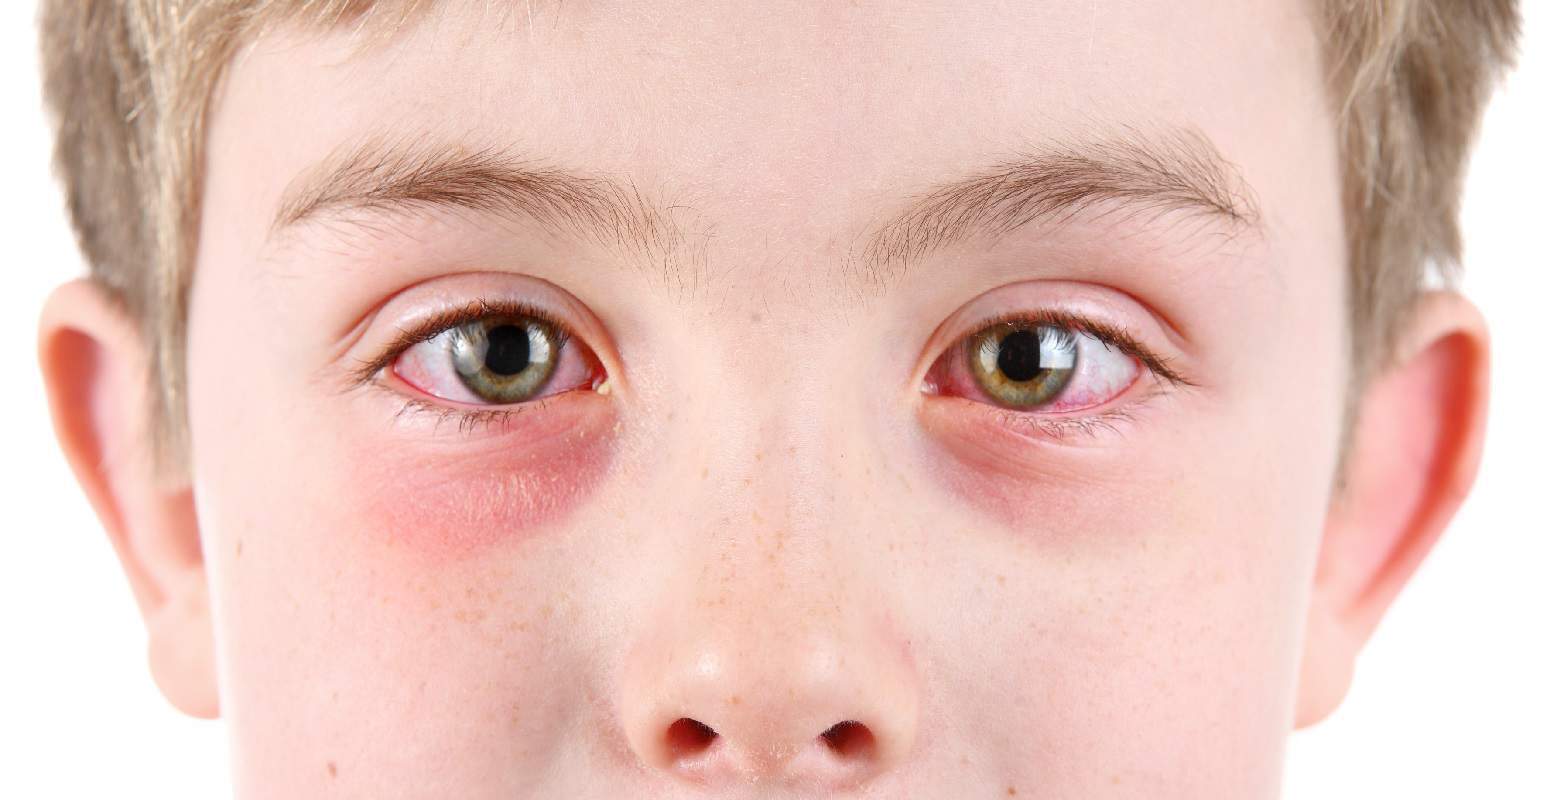 PinkEye(Conjunctivitis): Signs, Causes, Diagnosis, Treatment & Prevention